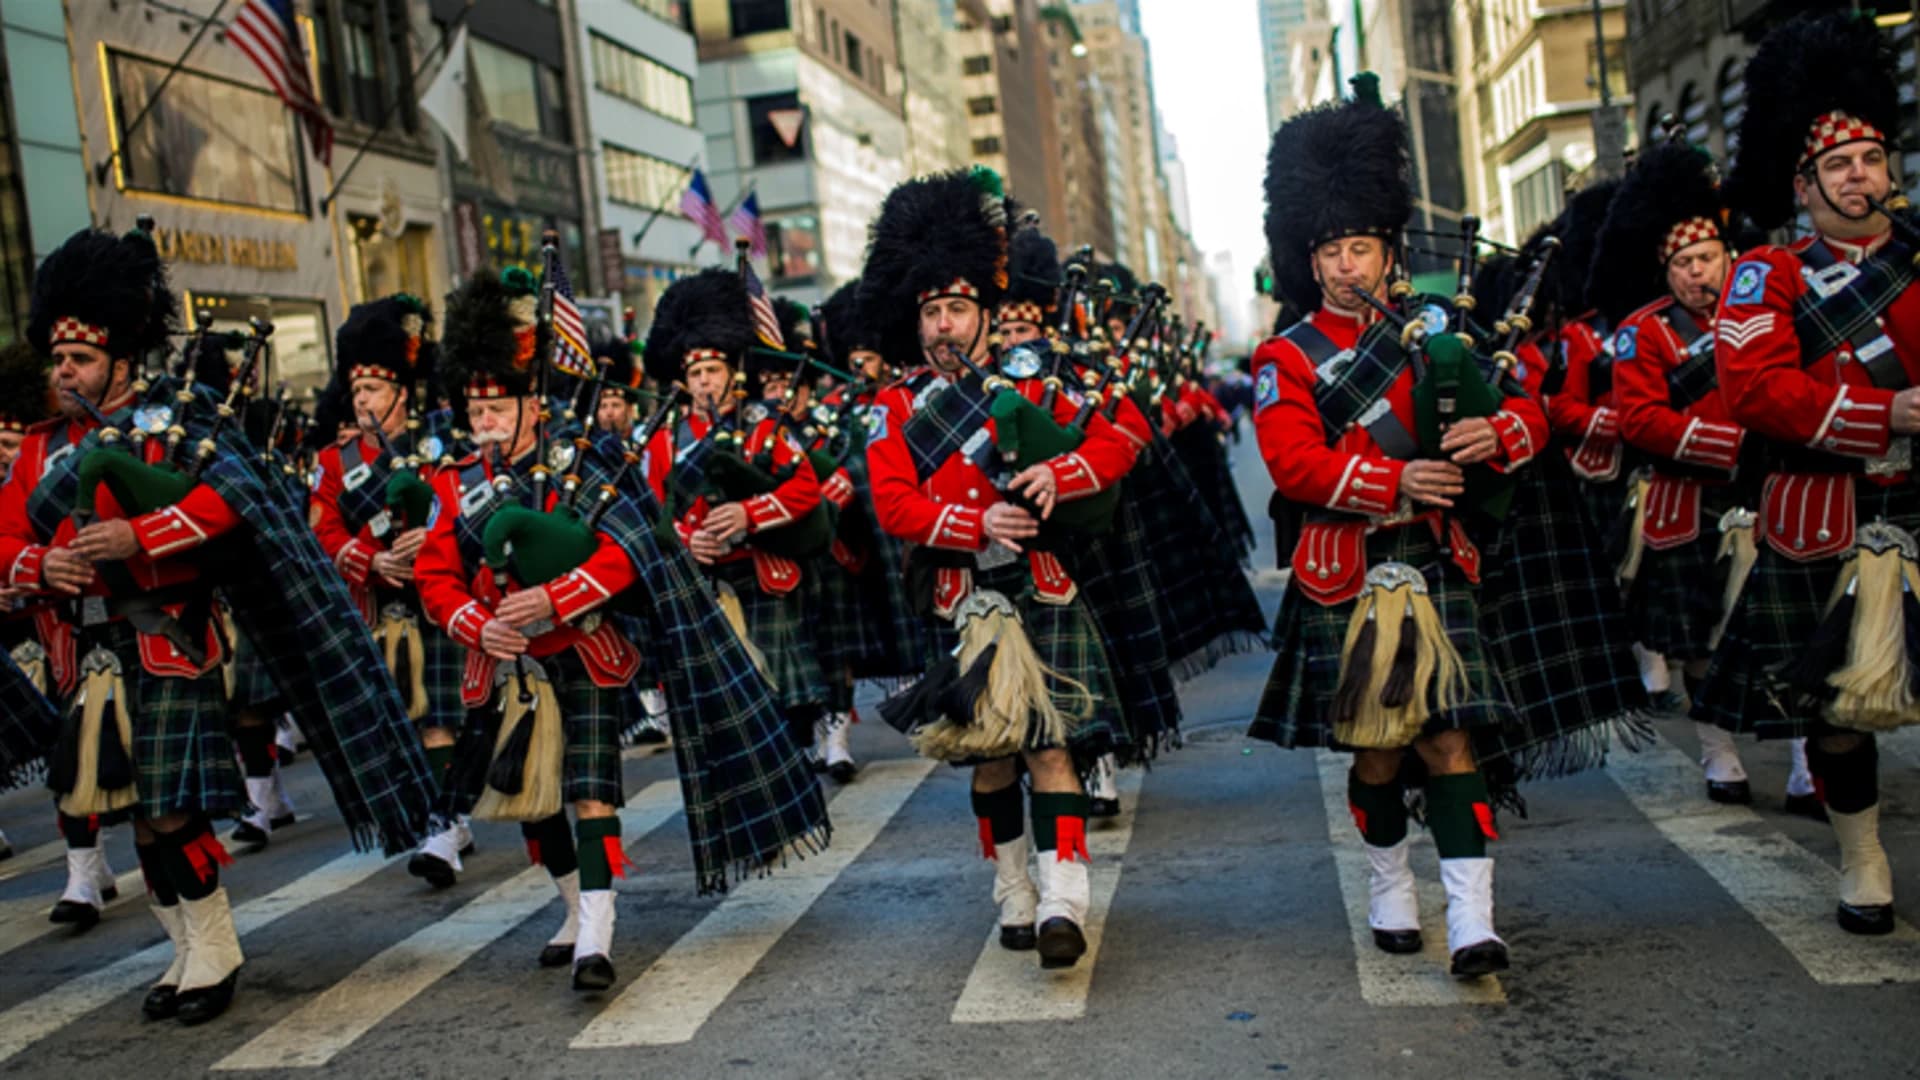 Cuomo says health experts recommend canceling NYC St. Patrick's Day parade